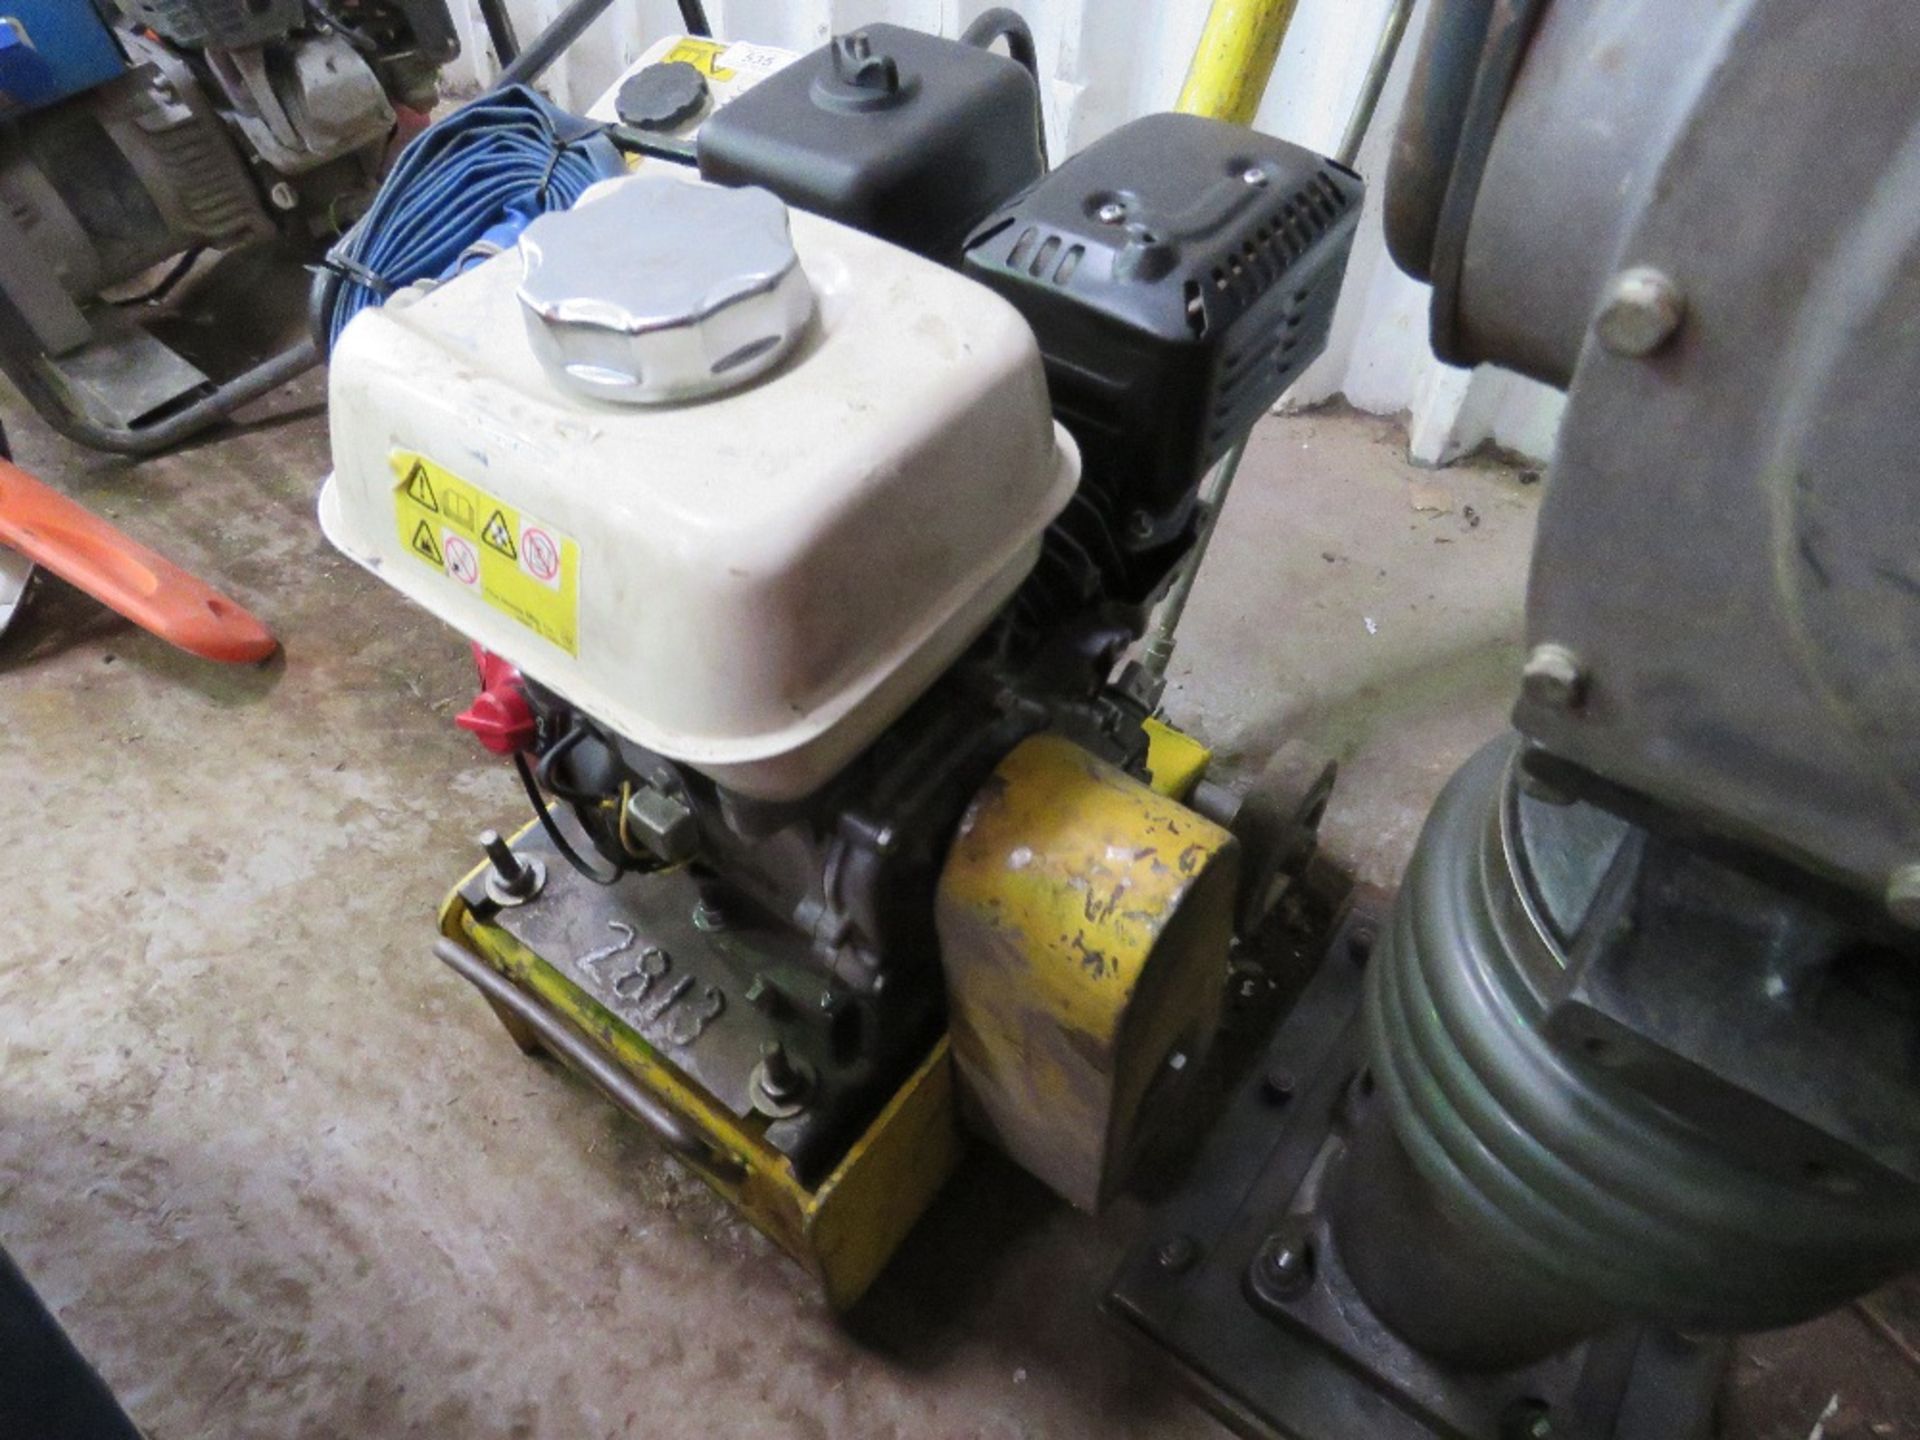 PETROL ENGINED FLOOR GRINDER. BOTTOM MOTOR SHAFT MISSING. DIRECT FROM LOCAL COMPANY AS PART OF THEIR - Image 3 of 3